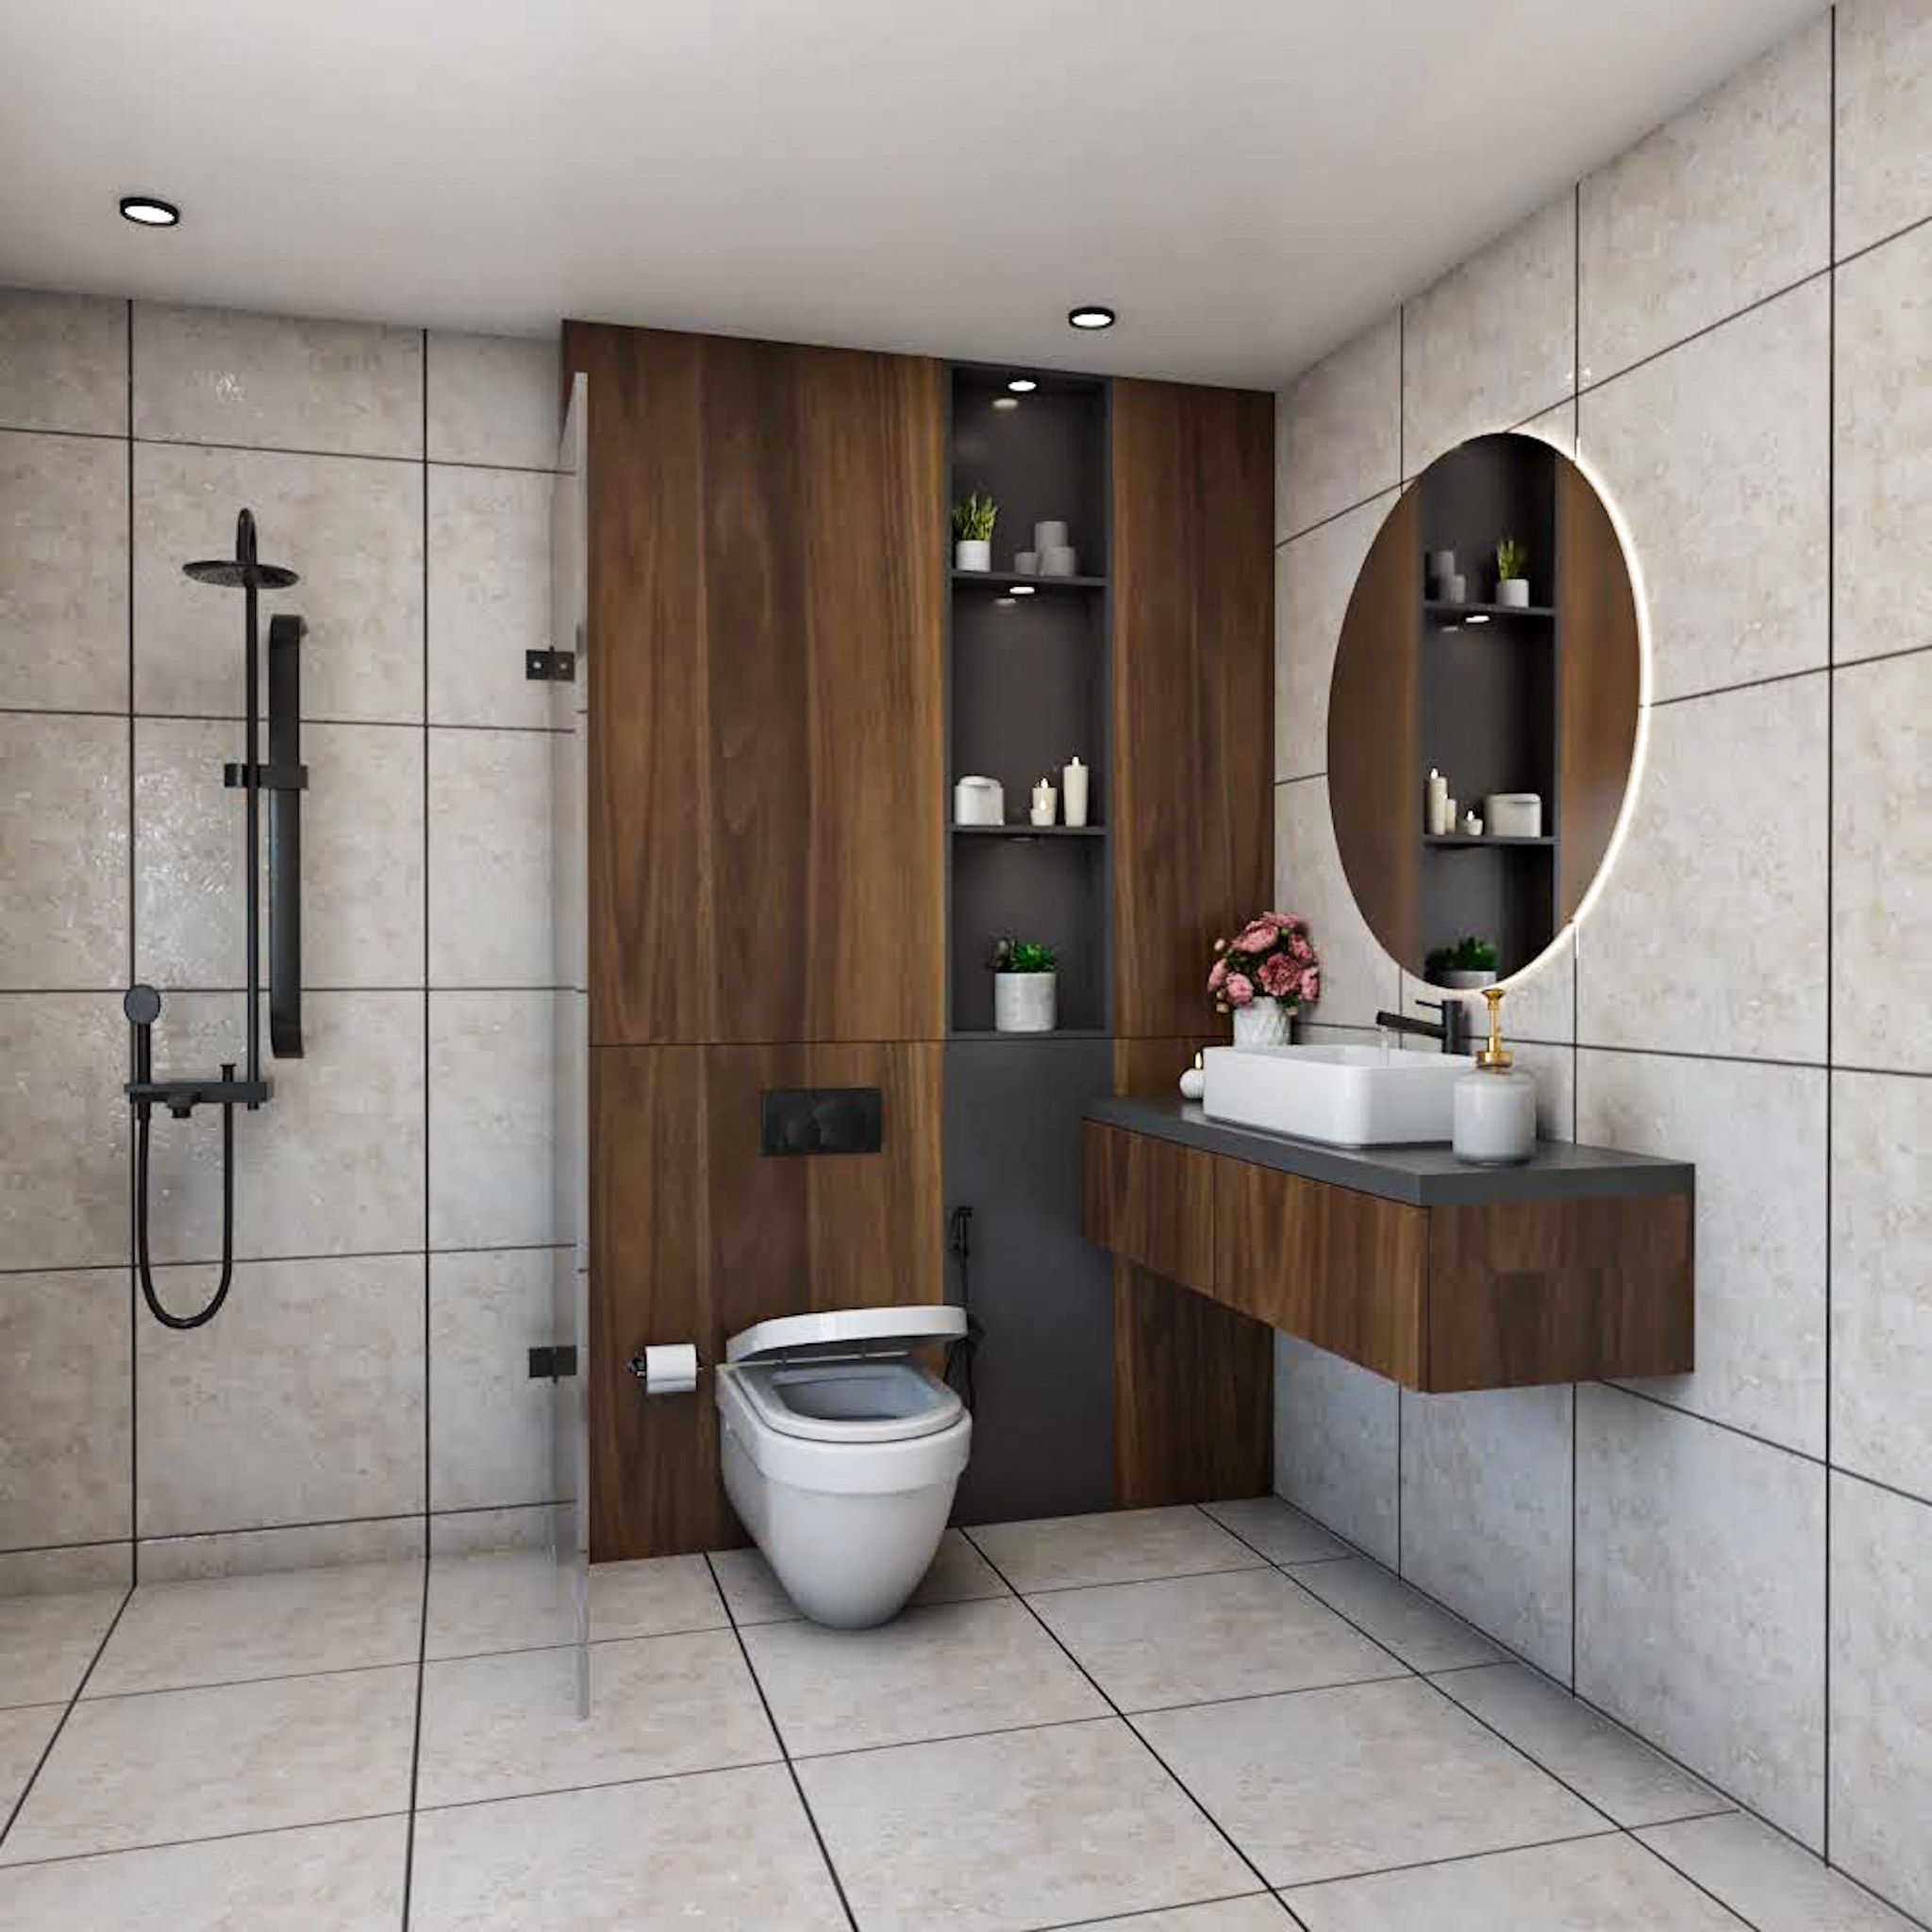 Modern Bathroom Design With A Round Mirror And Profile Lights